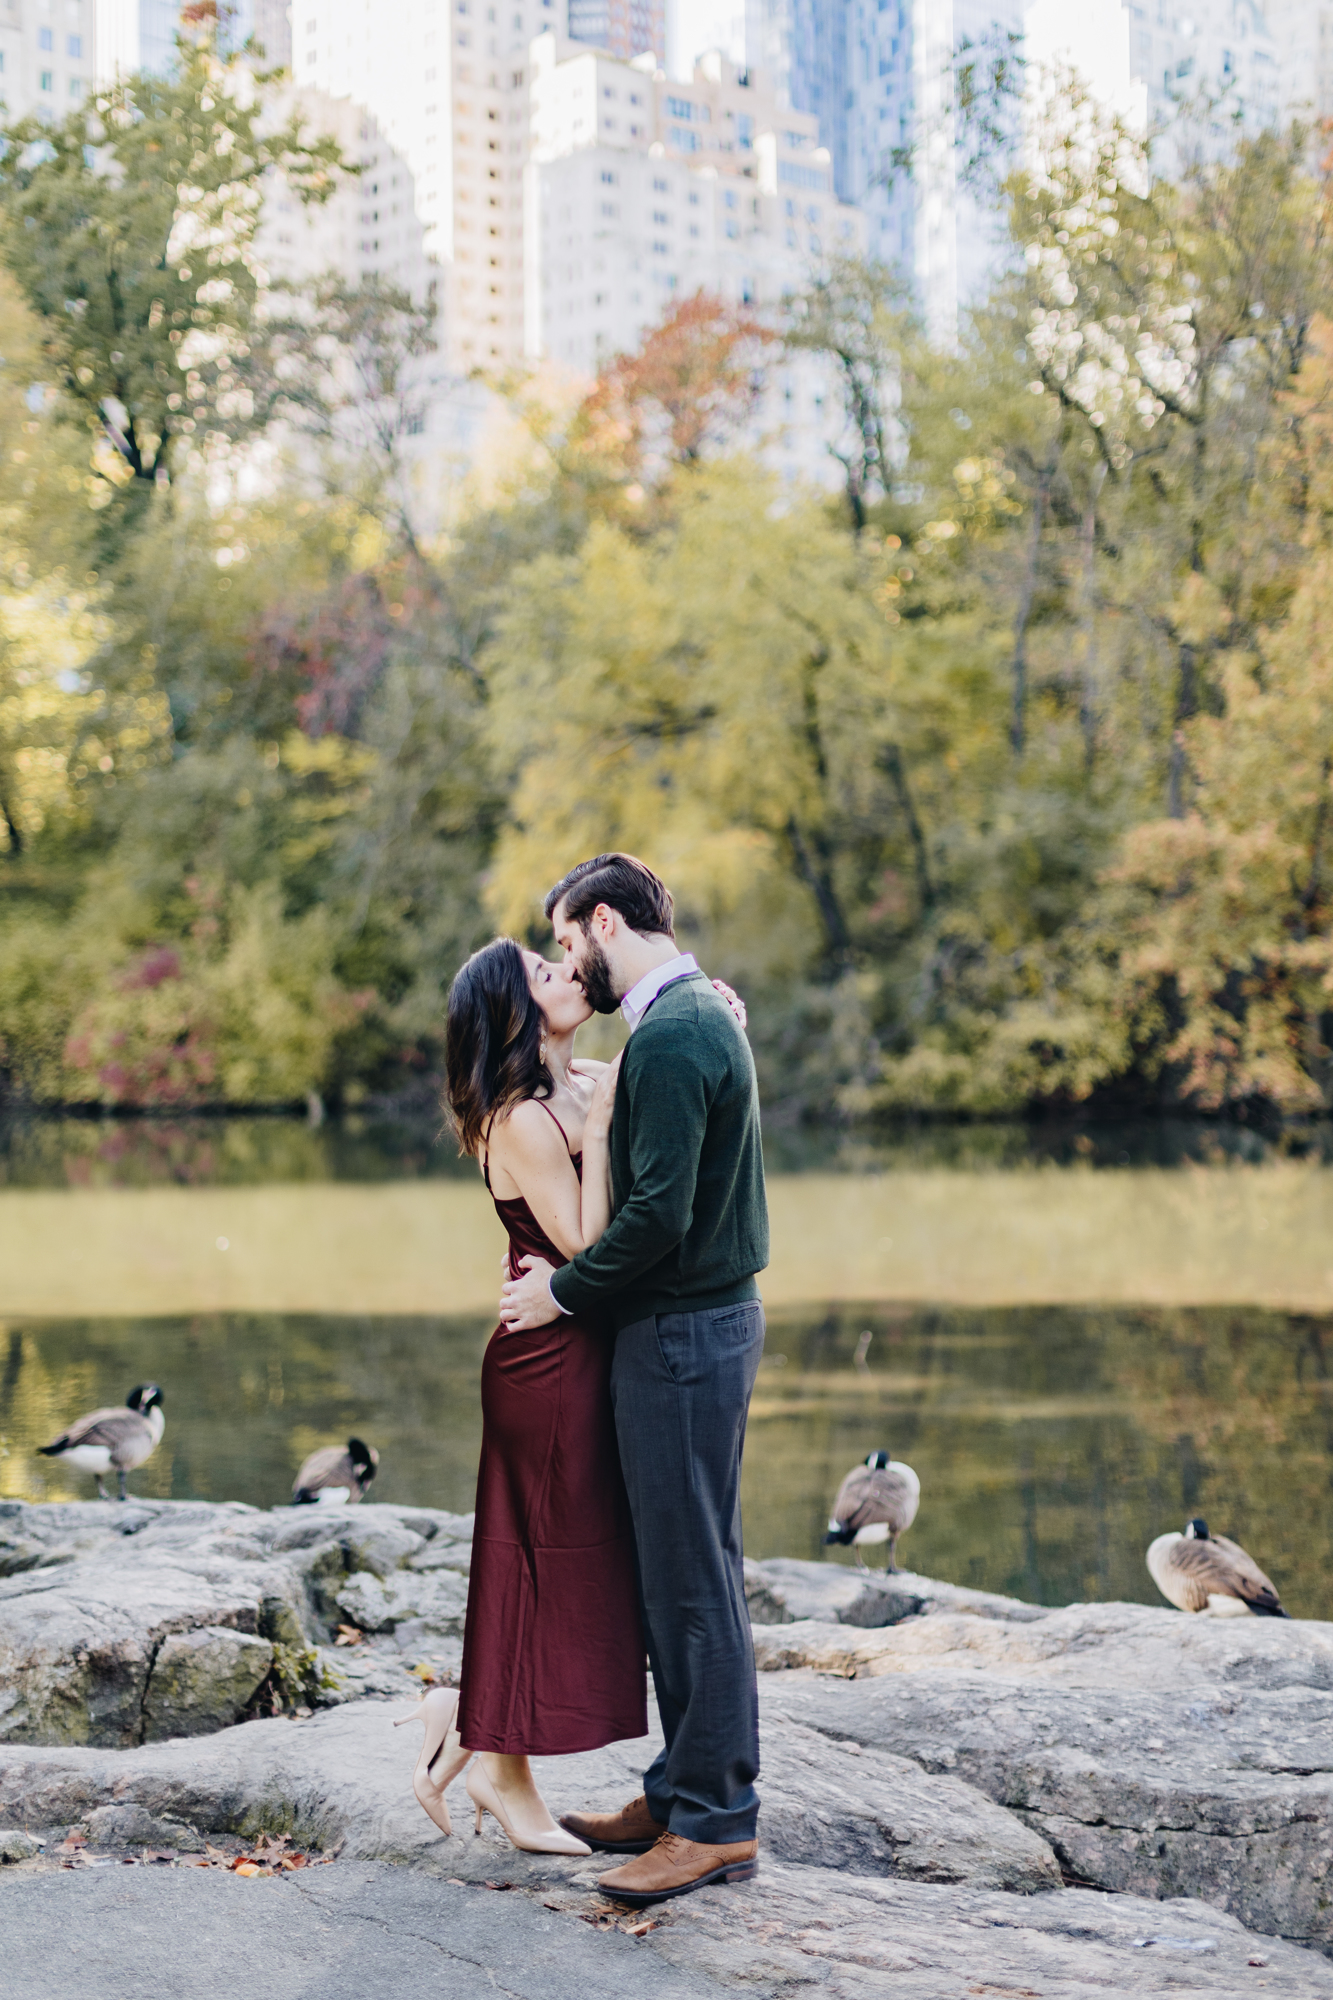 Charming Central Park Engagement Photos in Fall